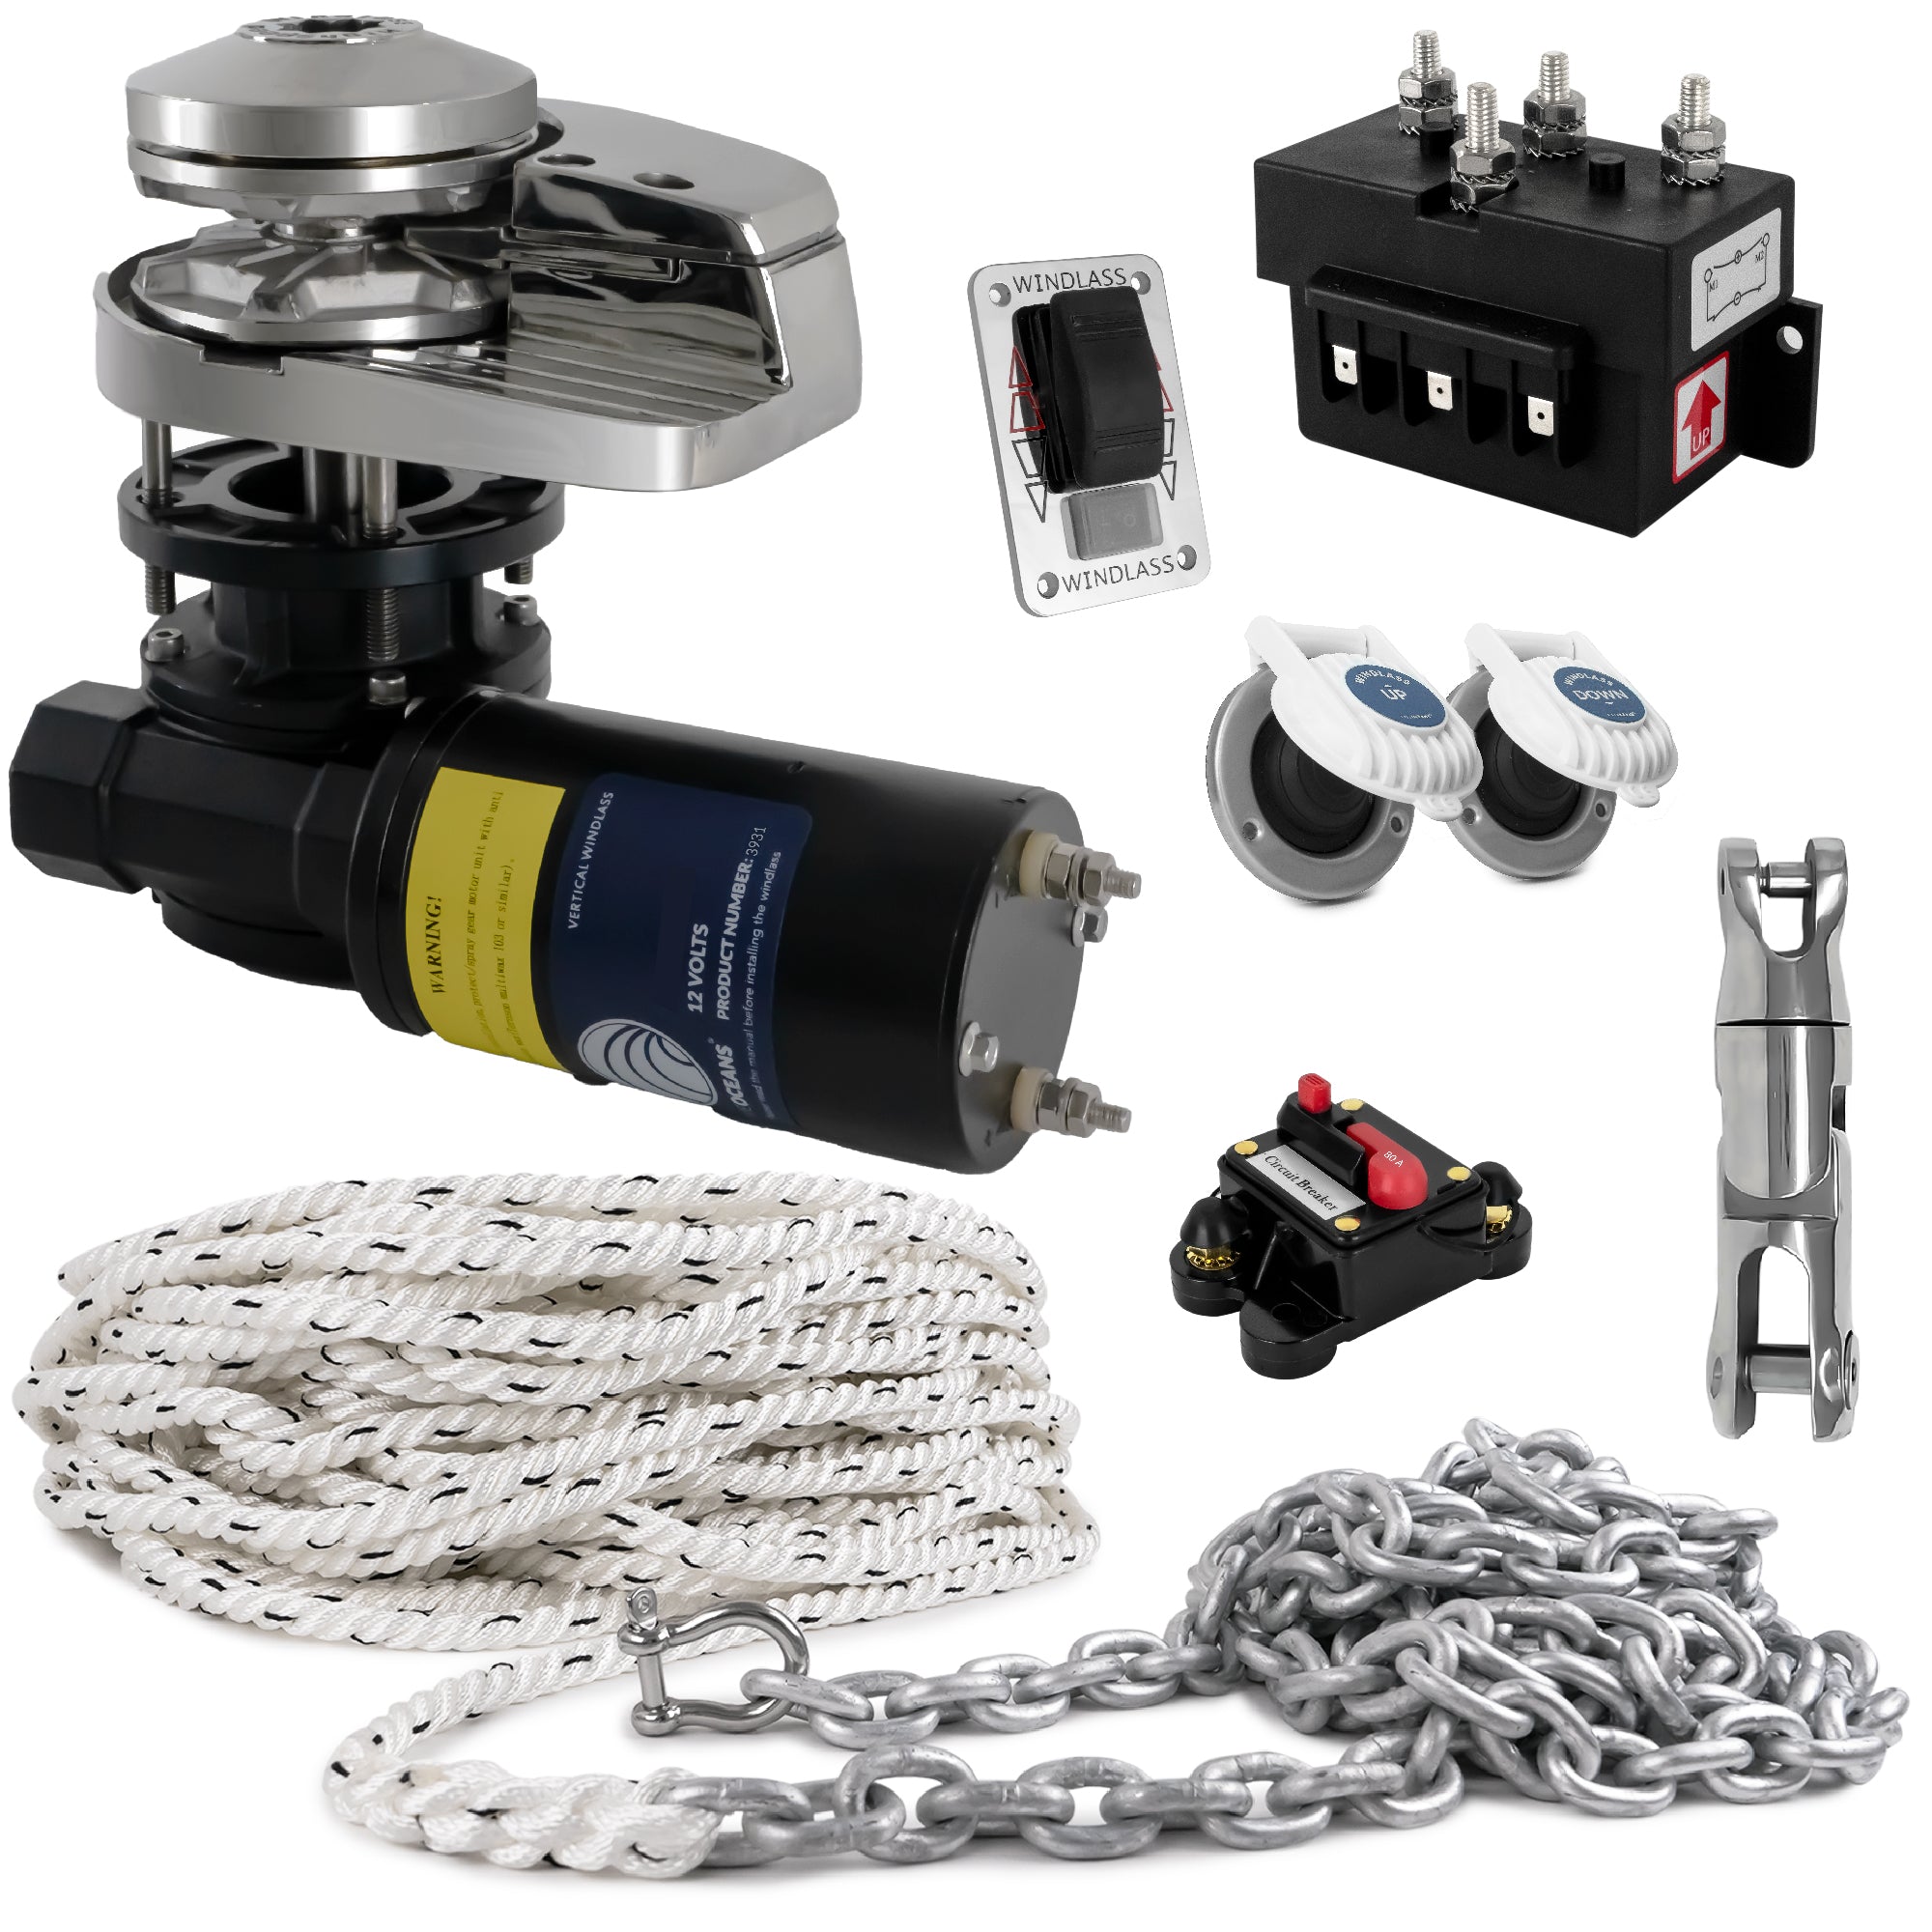 Pacific Windlass Kit, Vertical 900 Watts, 12V DC, 3-Strand Rope, Galvanized Steel HT G4 Chain, Swivel and Shackle - FO3287-C1